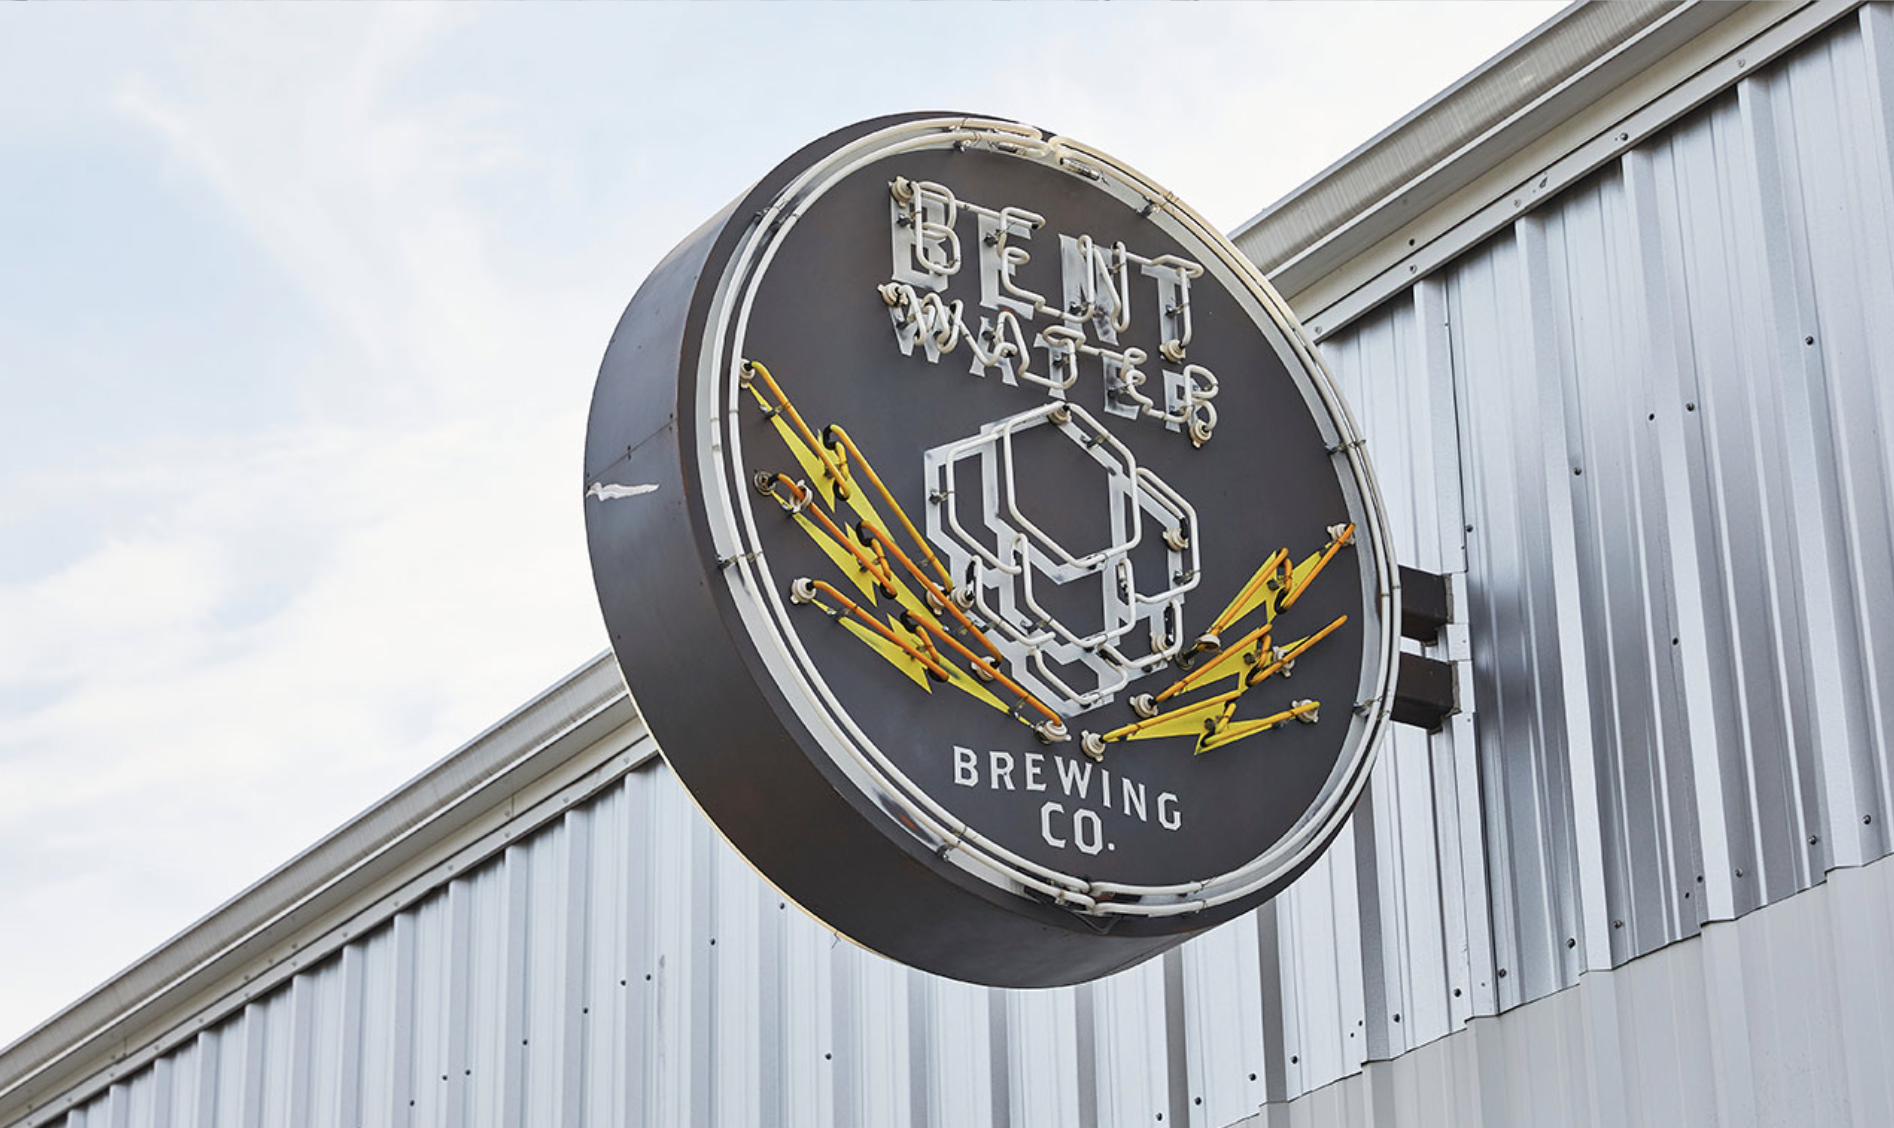 Round neon sign for Bent Water Brewing Co.